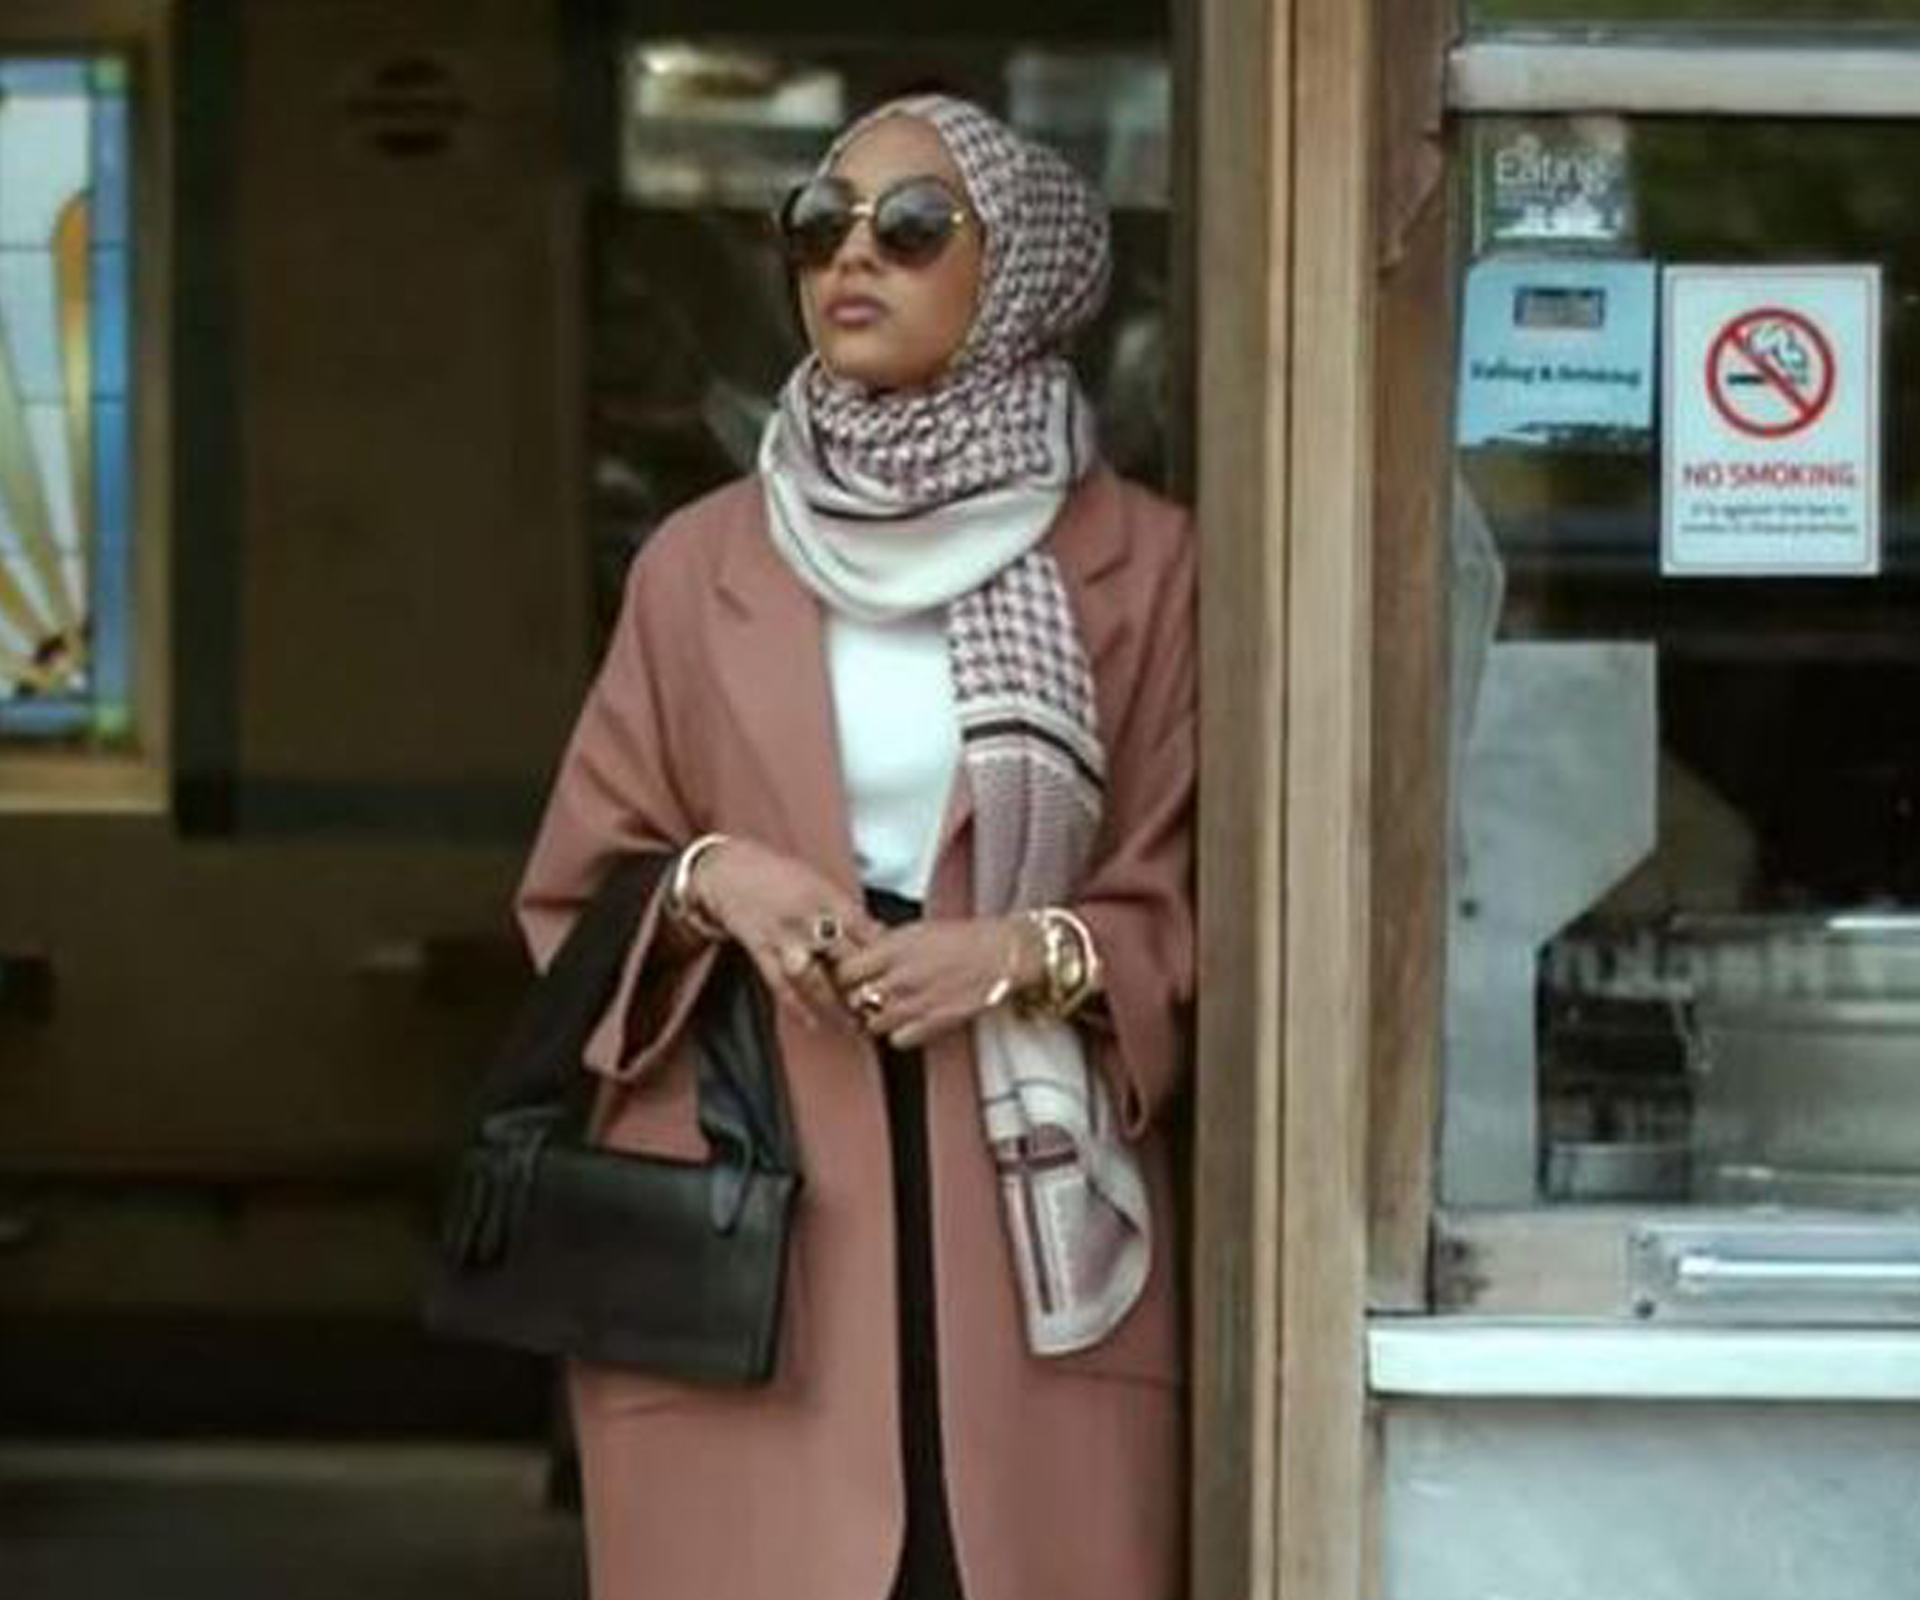 H&M unveil new campaign featuring model wearing hijab